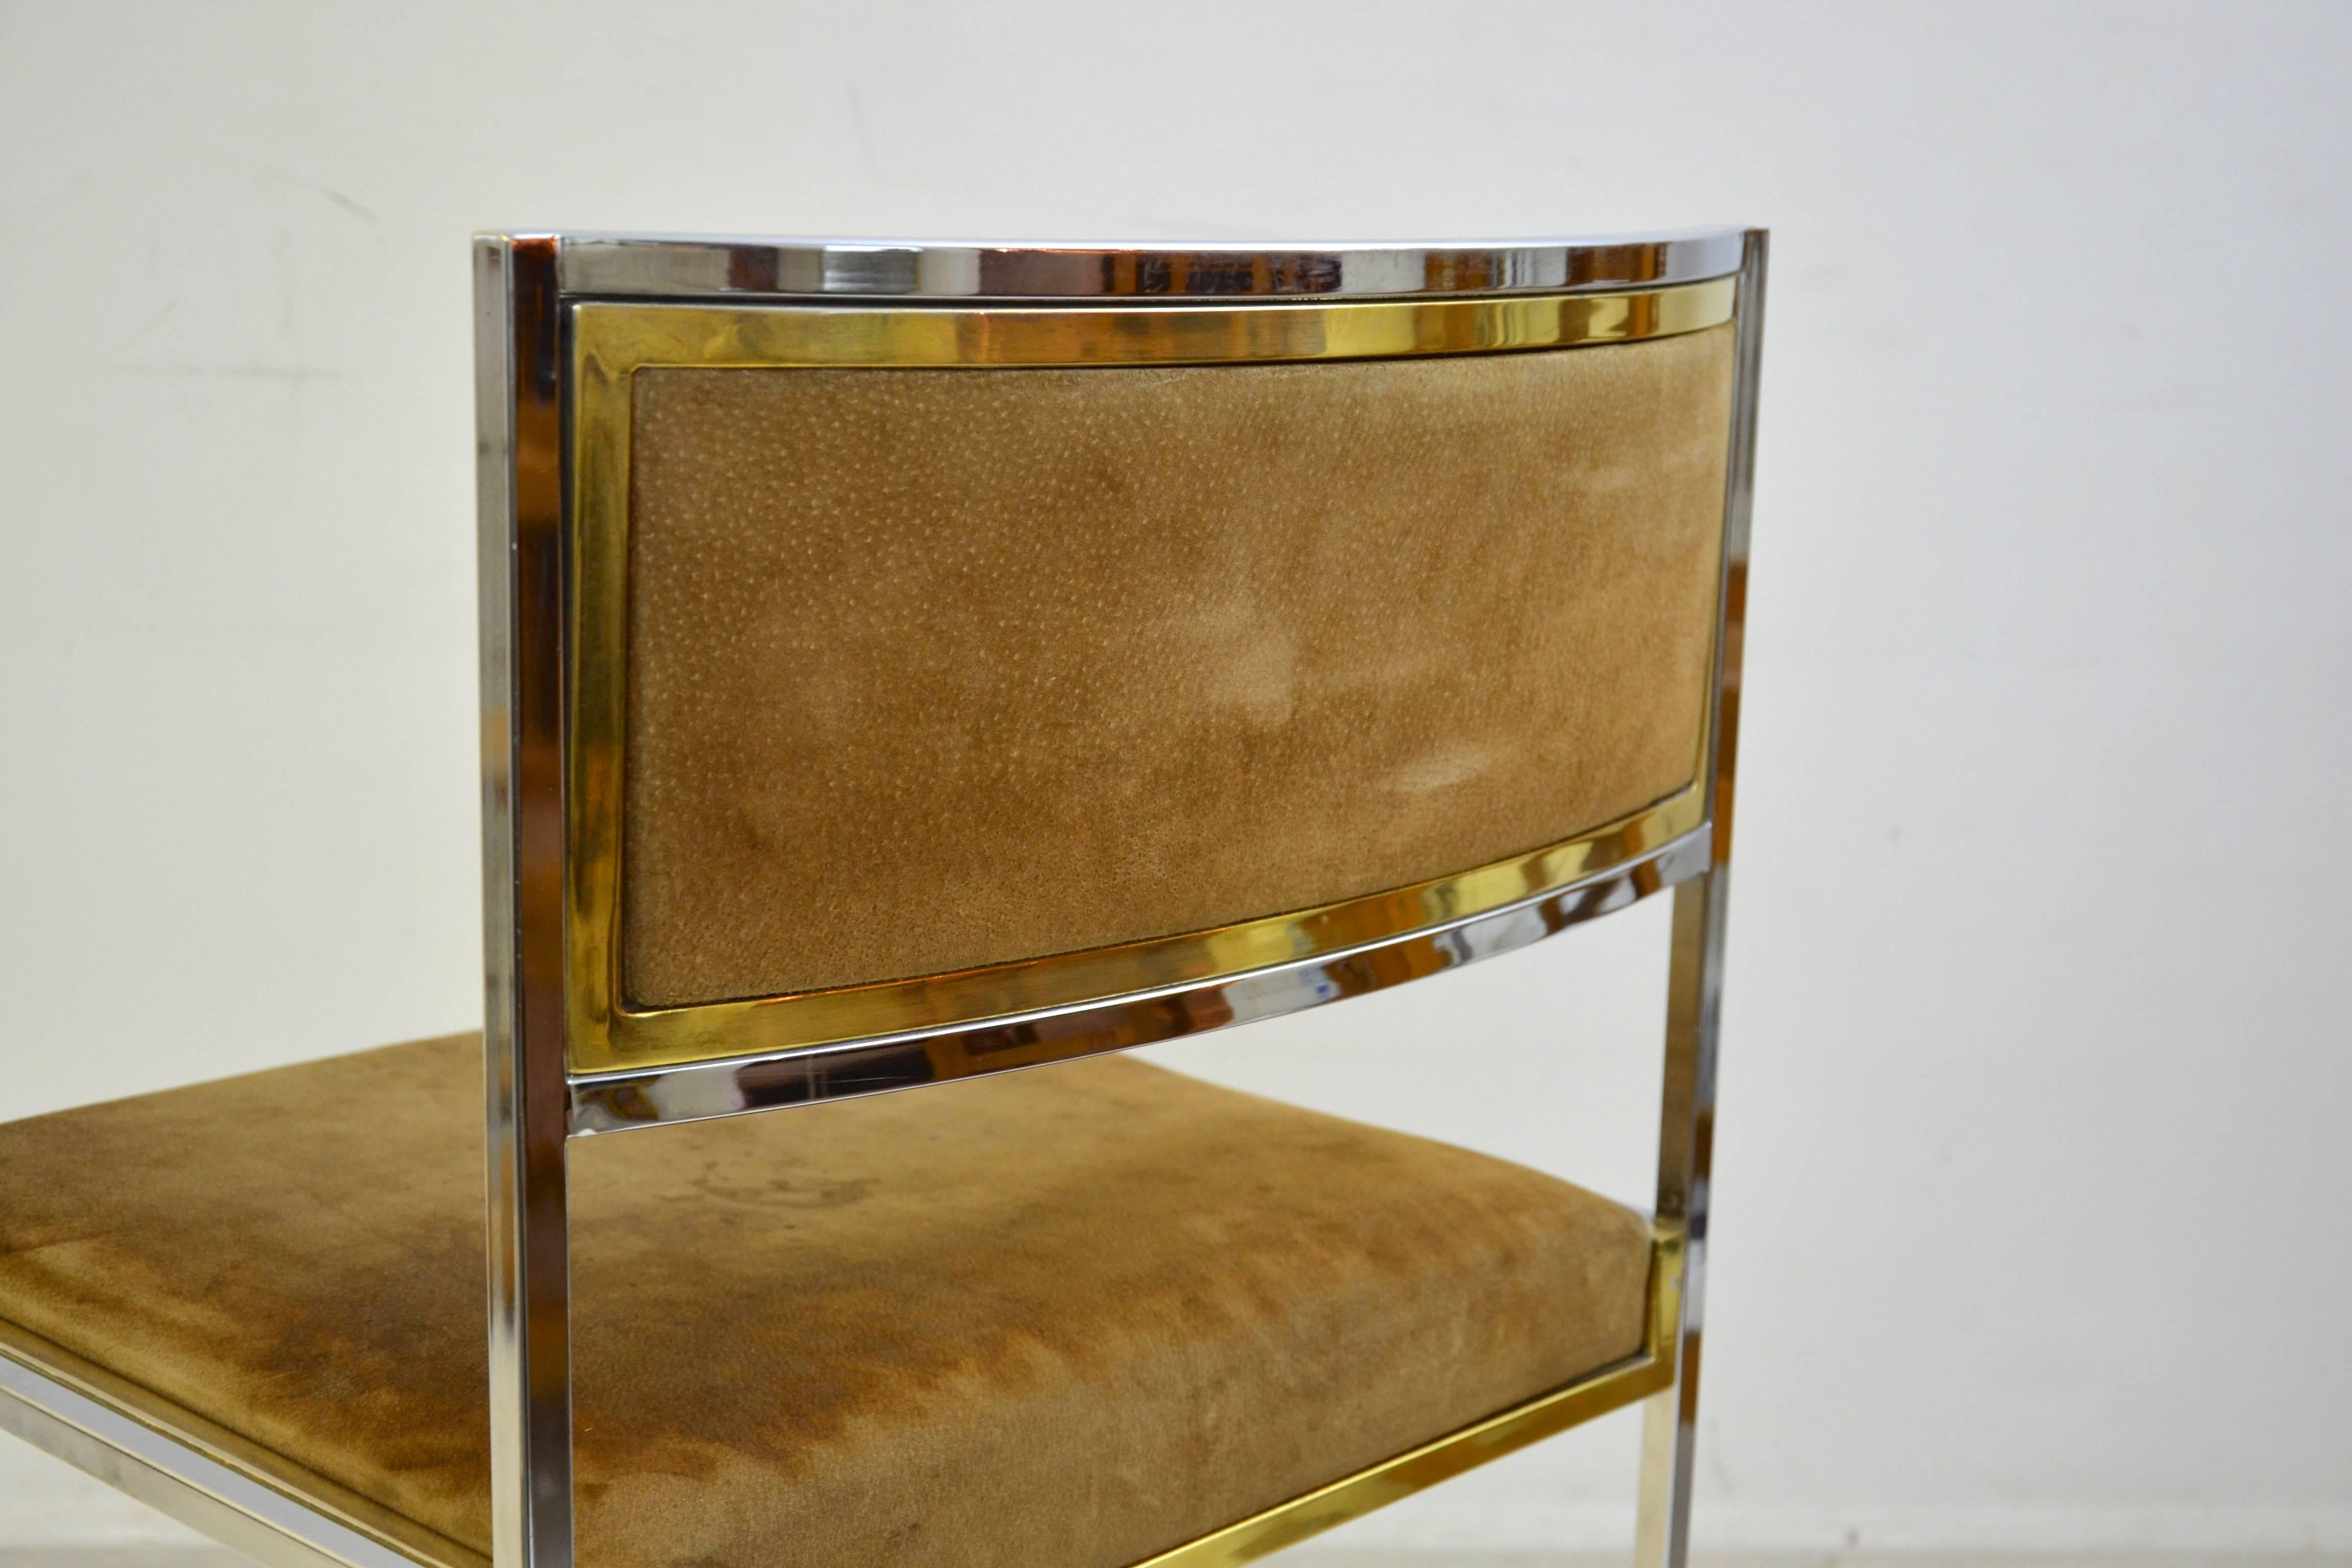 Set of Ten 1970s Willy Rizzo Chairs in Brass and Chrome, to be Re-Upholstered 2